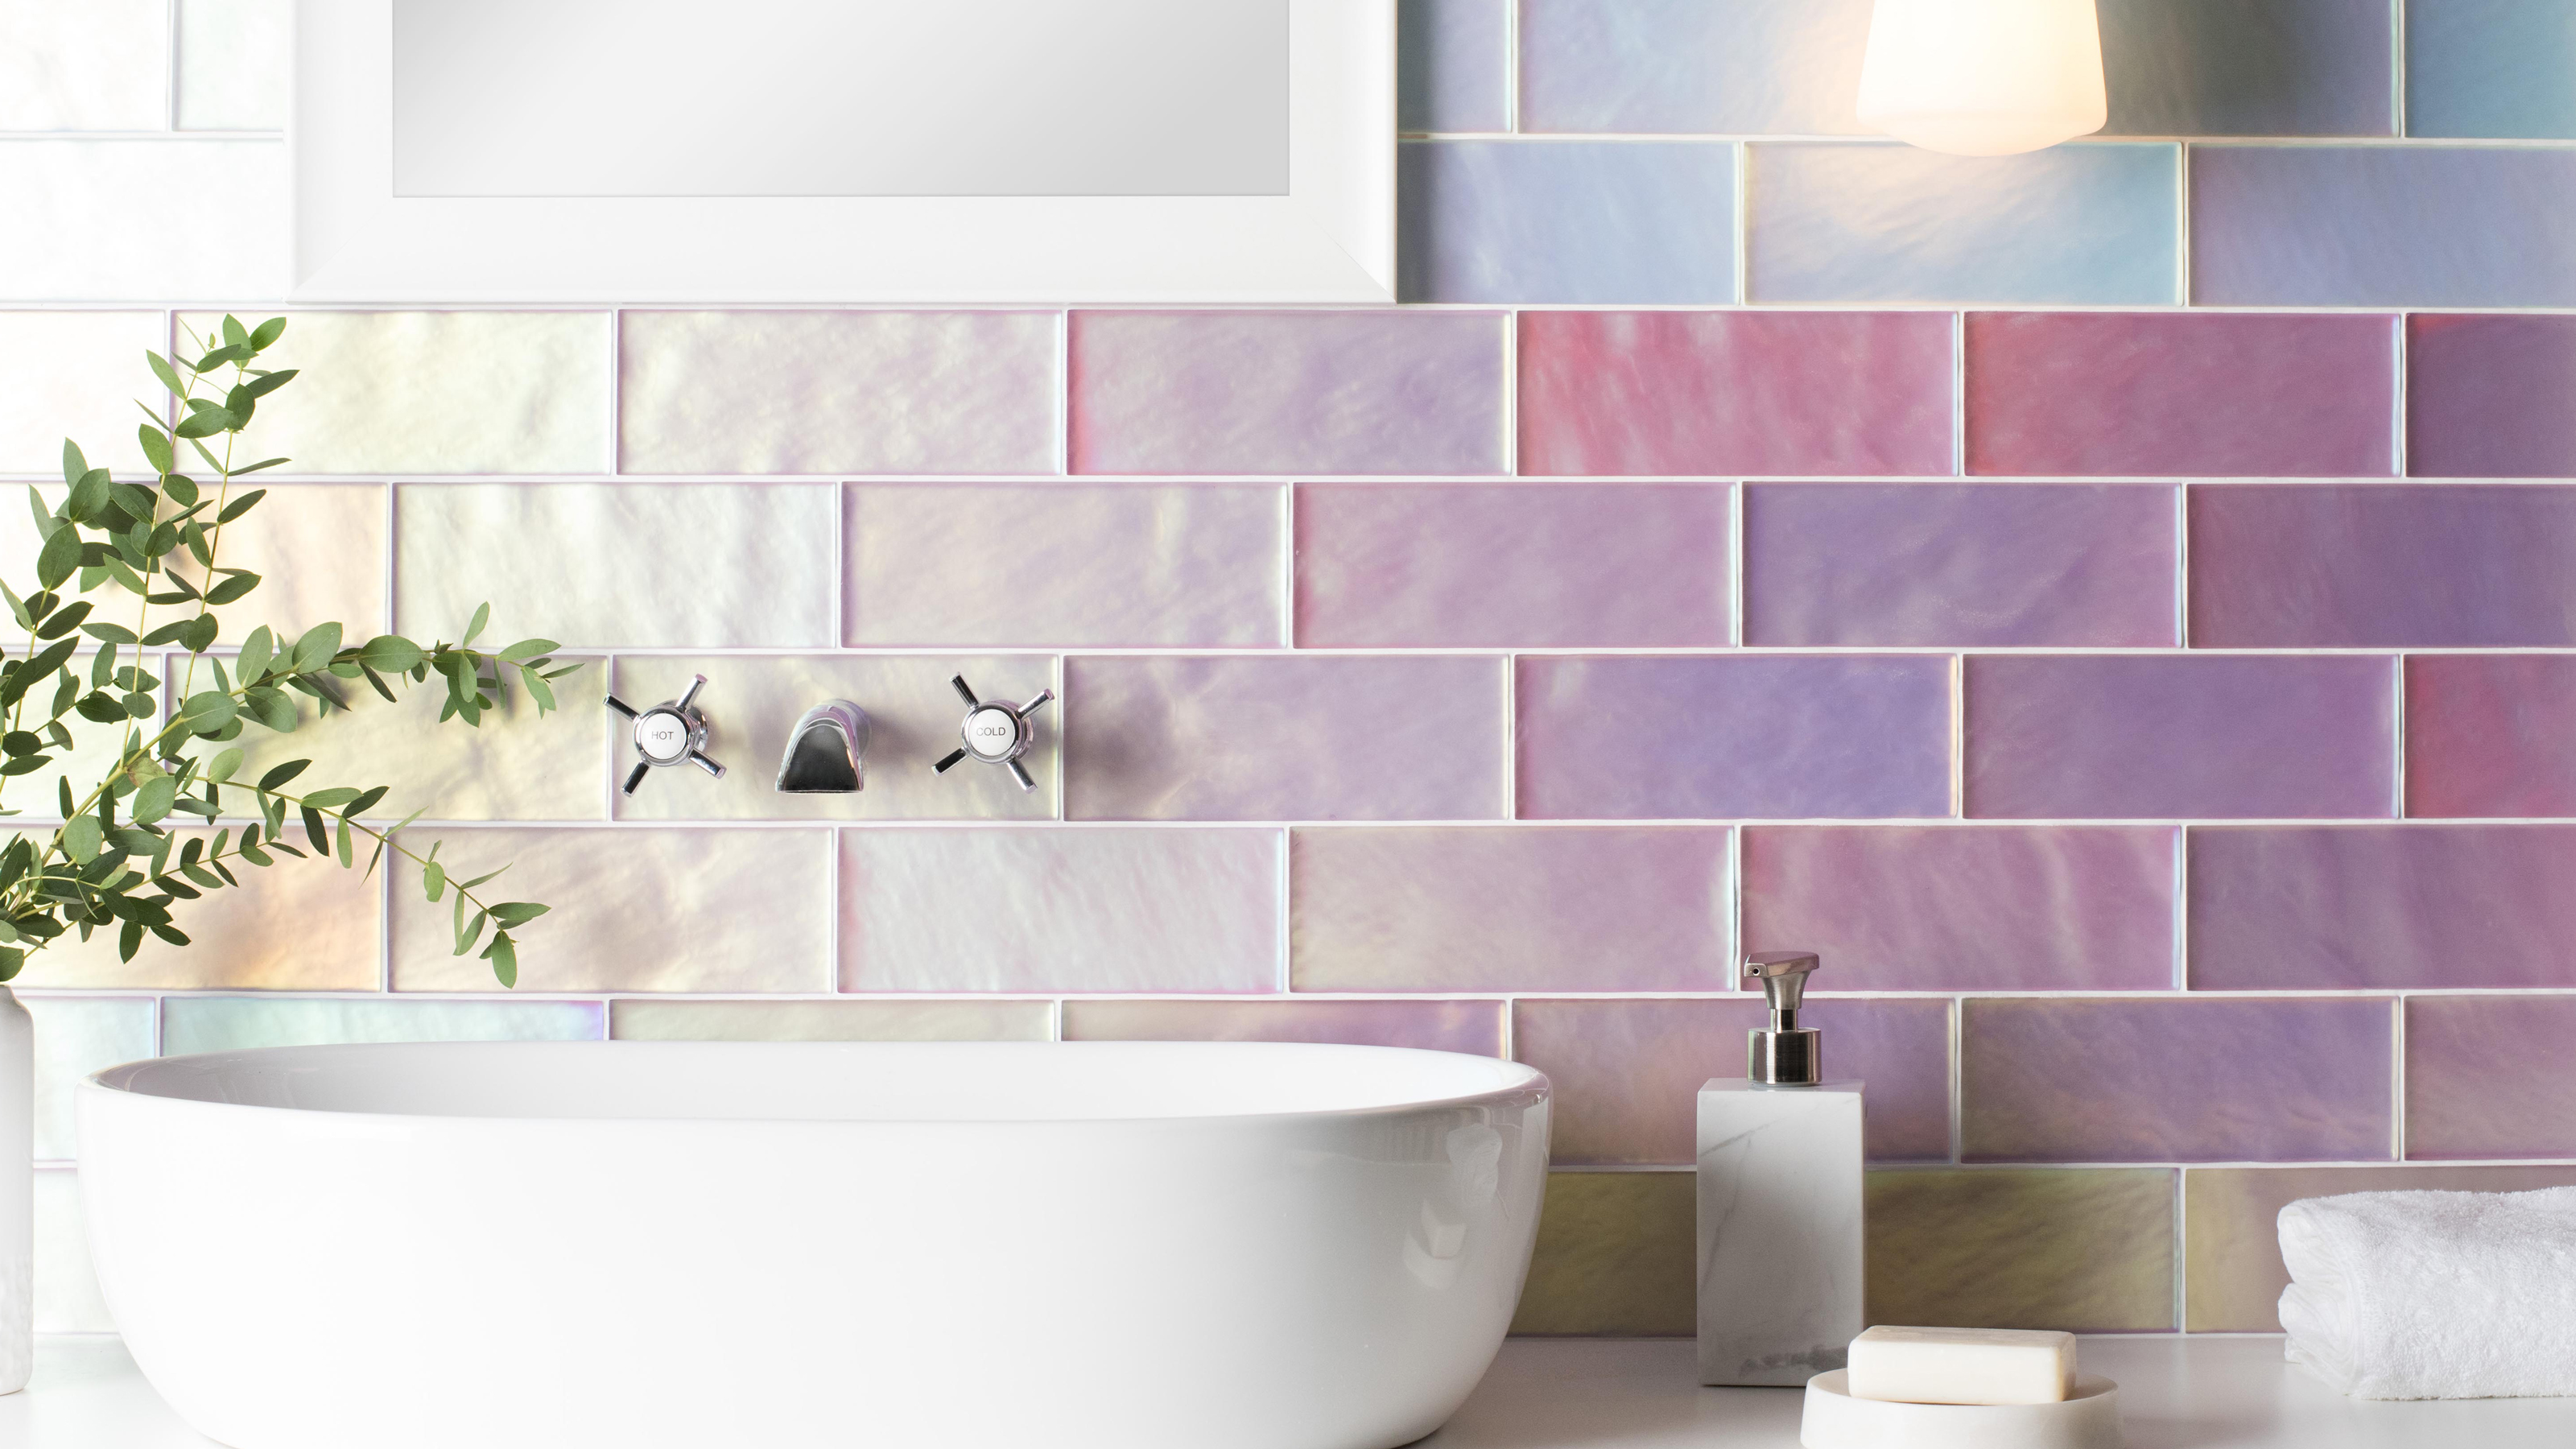 How to retile tile your bathroom wall